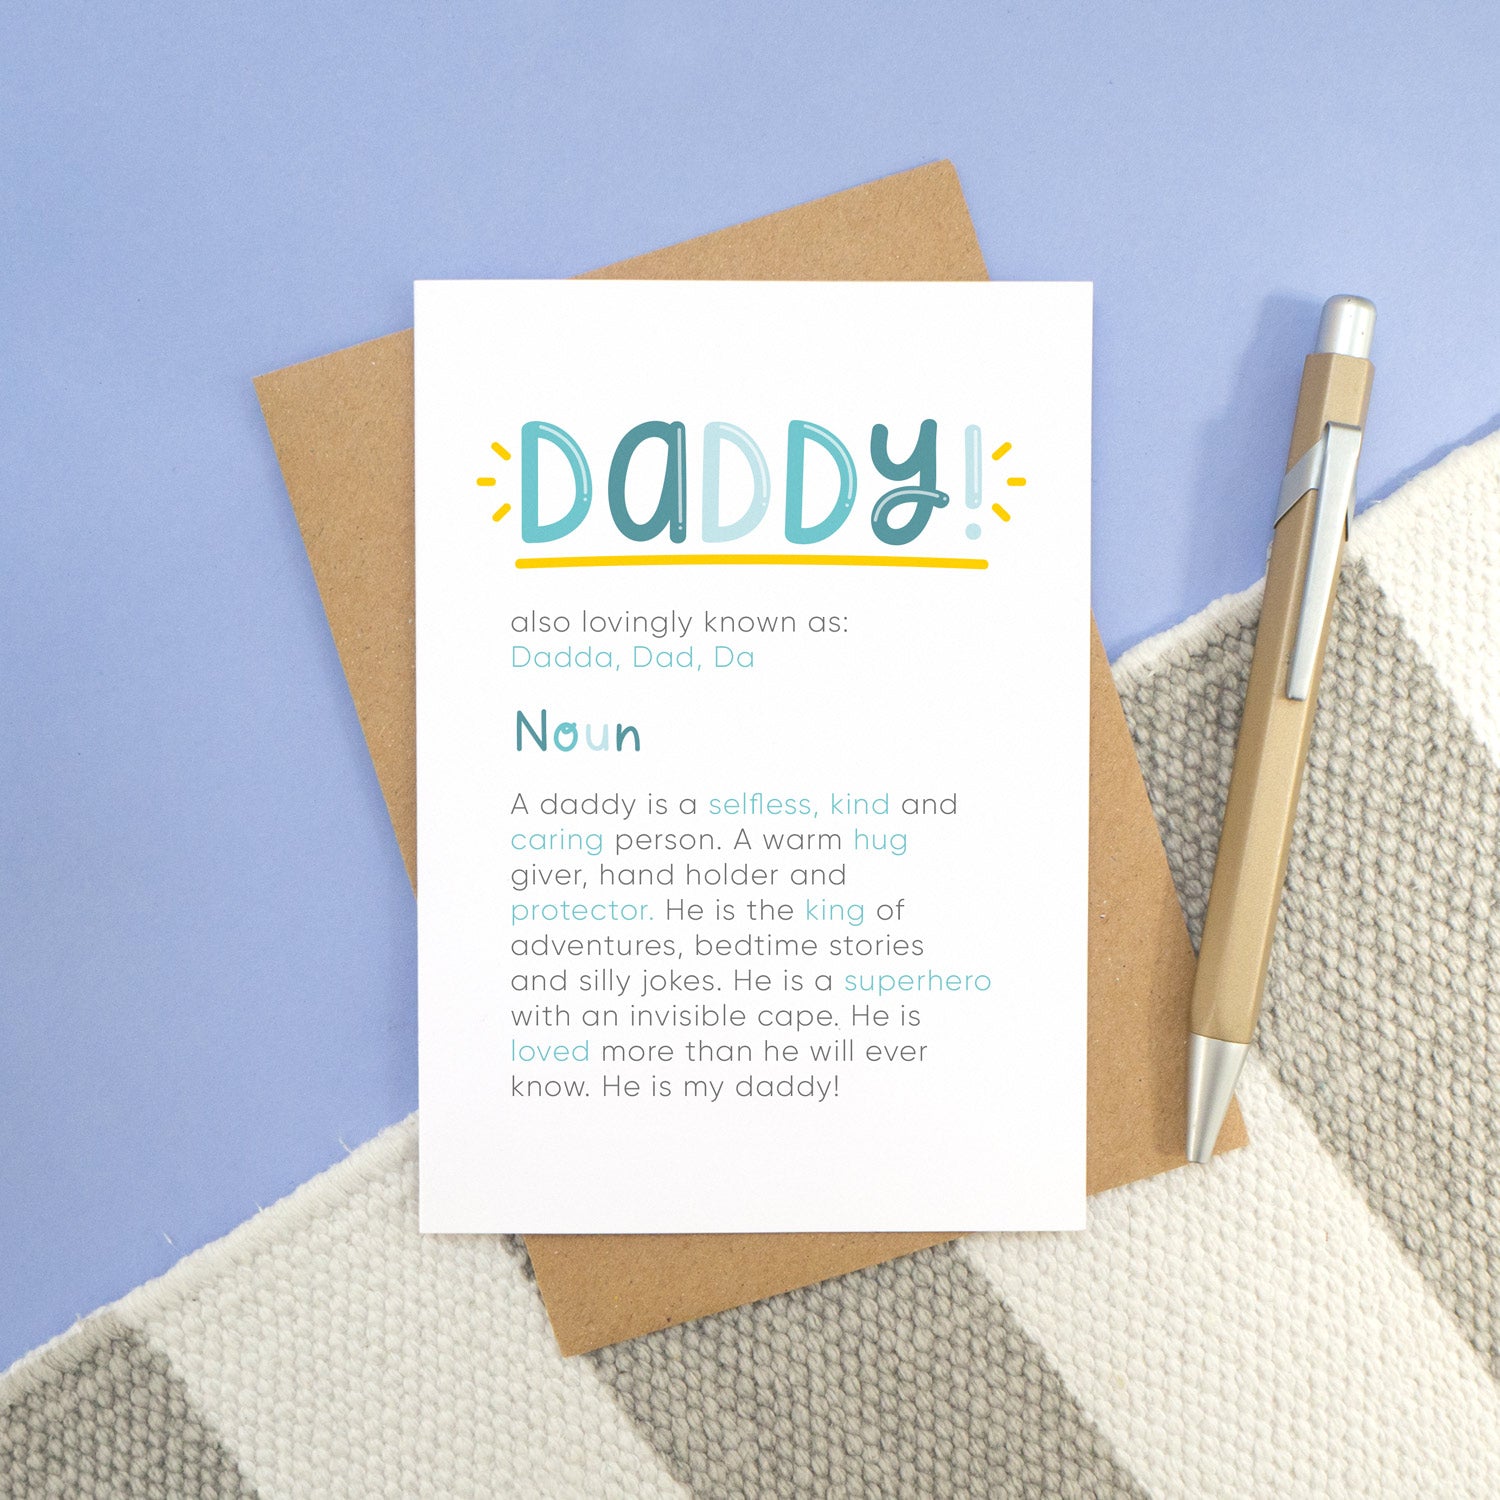 A daddy definition card laying on a stripy carpet and a blue background. The card shows daddy in bold lettering with the personalised nicknames underneath, followed by the definition.